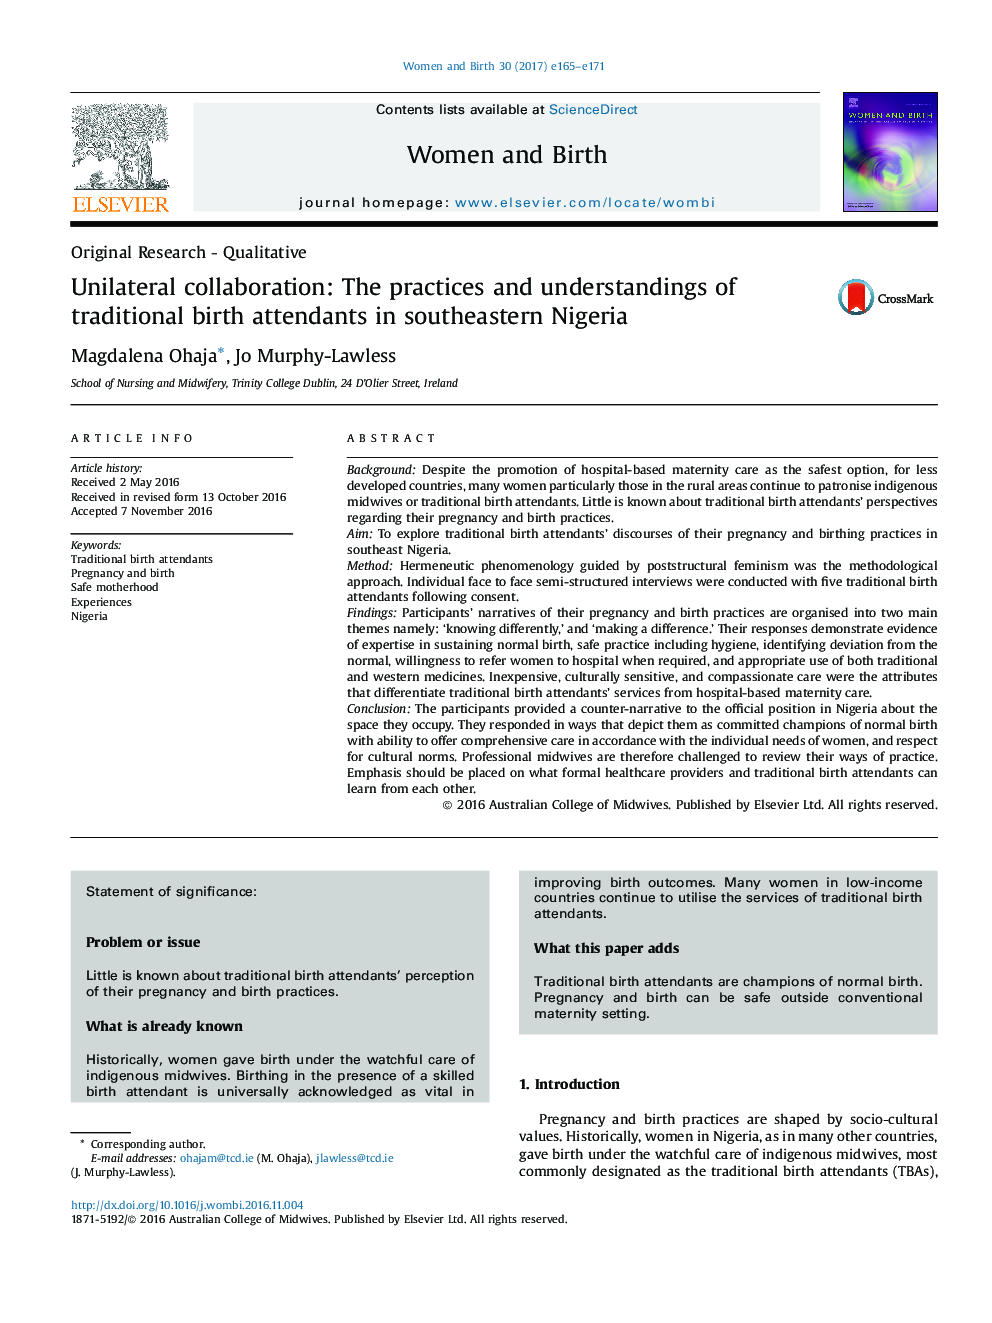 Unilateral collaboration: The practices and understandings of traditional birth attendants in southeastern Nigeria